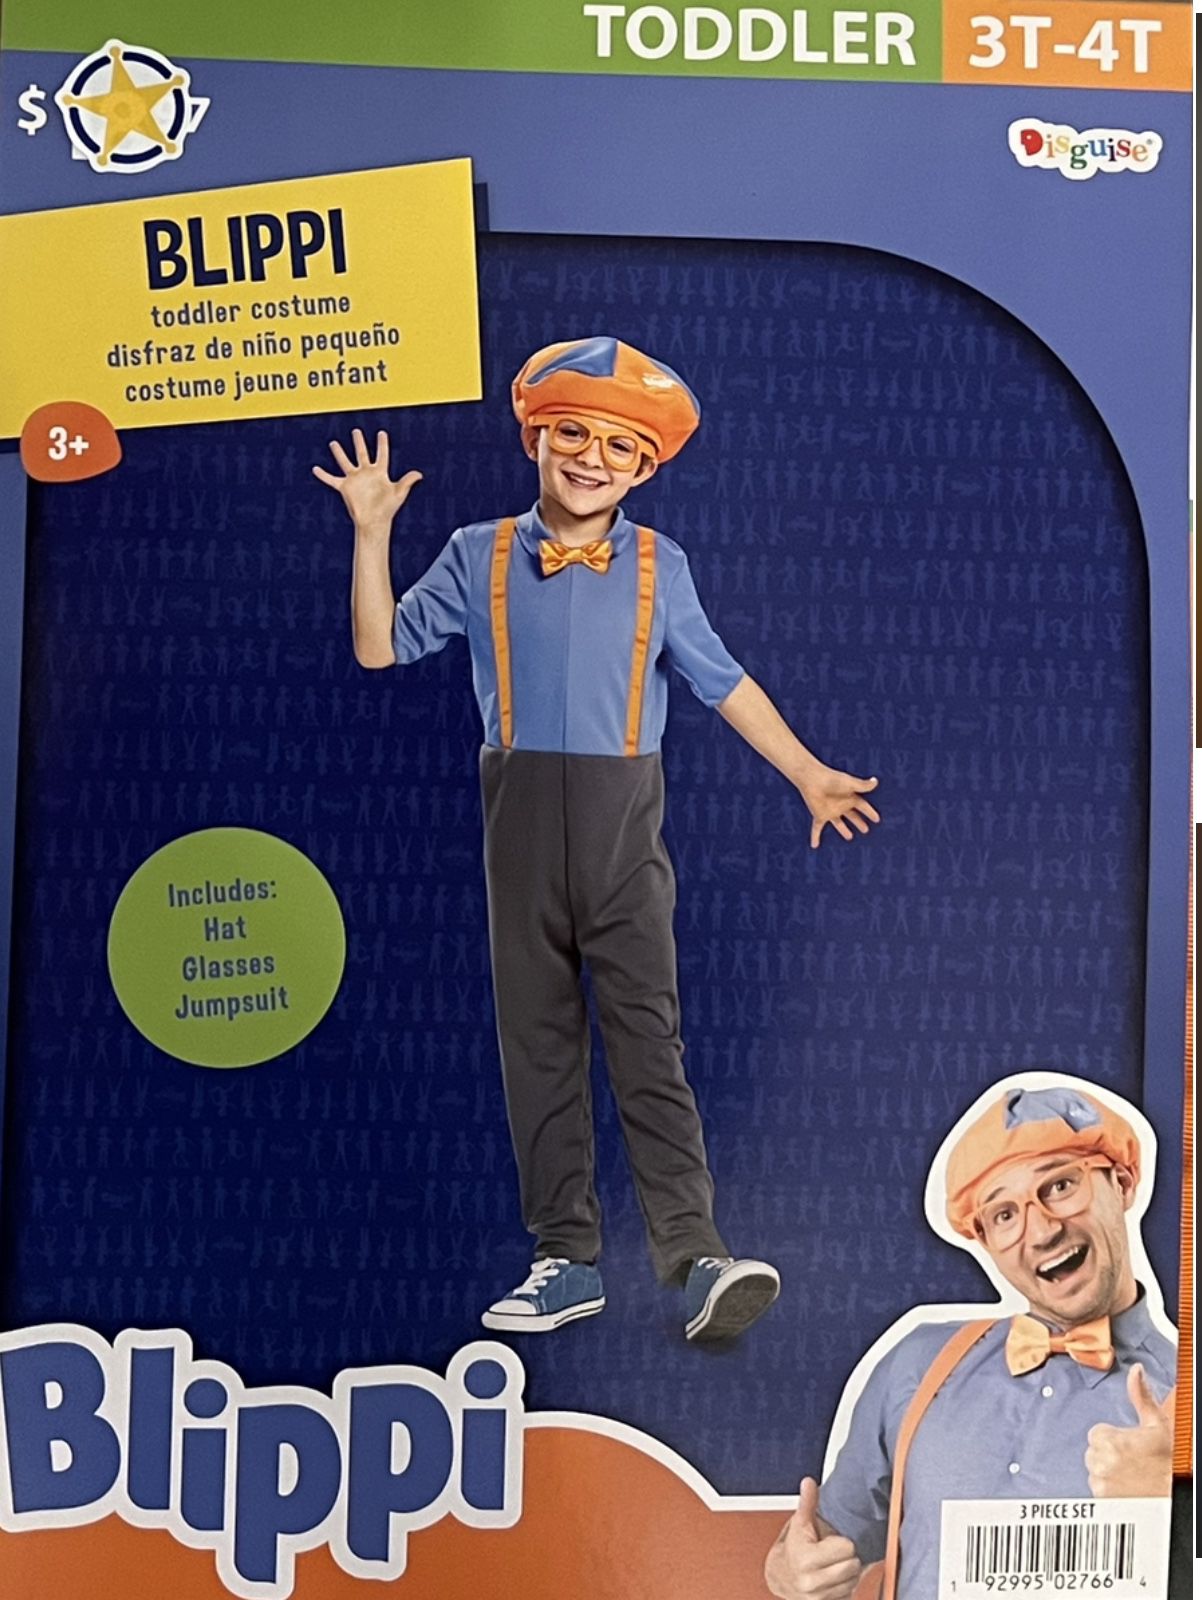 Toddlers M (3T-4T) Blippi Classic Costume 1ct - Litin's Party Value